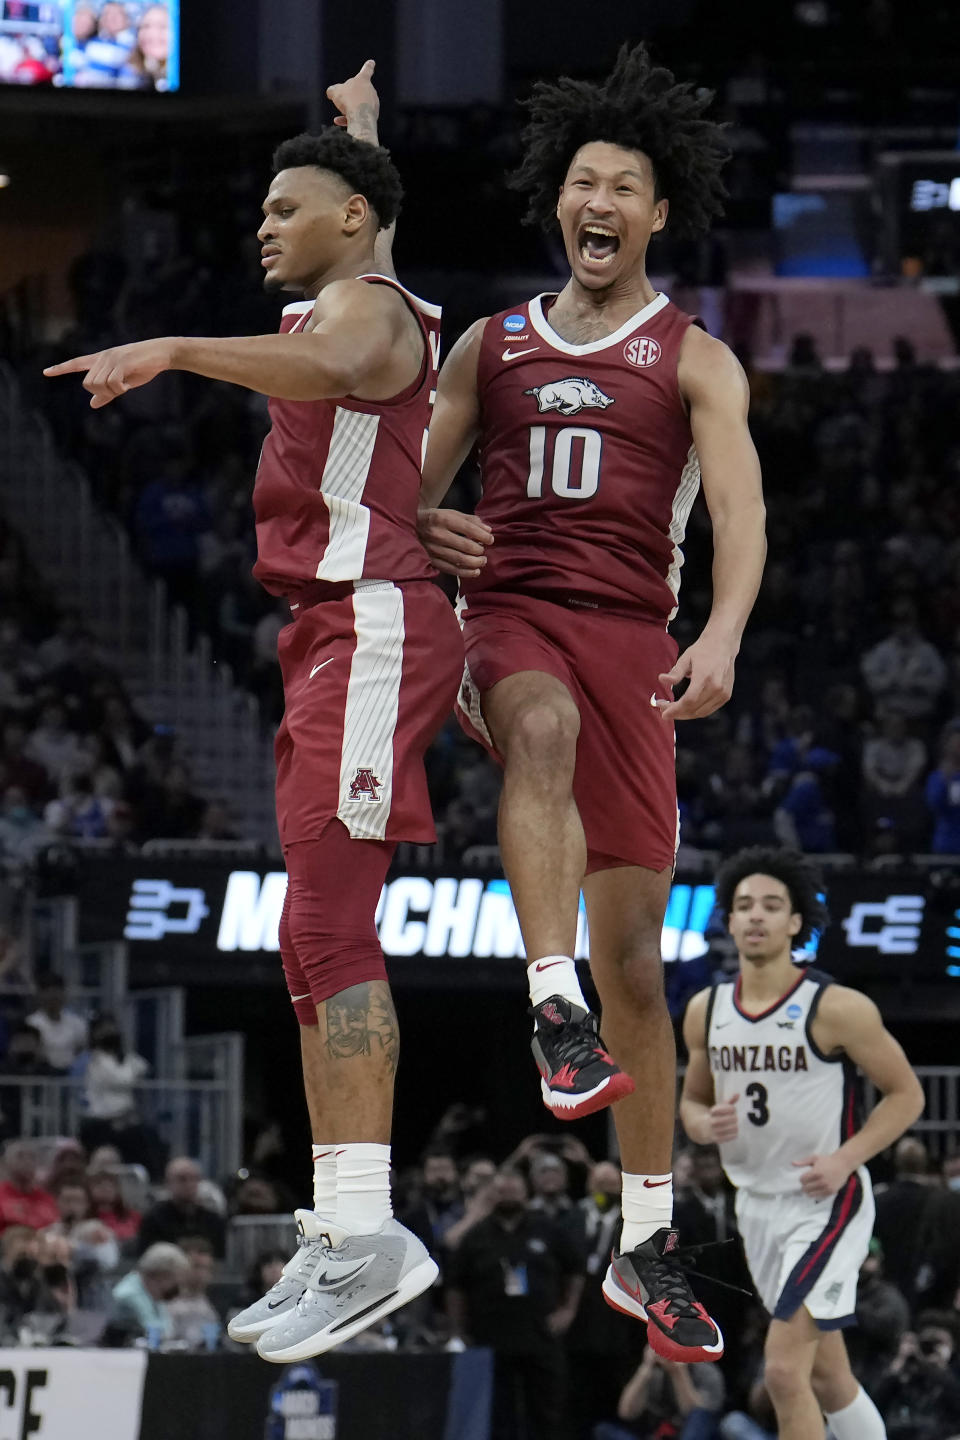 Arkansas guard Au'Diese Toney, left, celebrates with forward Jaylin Williams (10) during the second half of a college basketball game against Gonzaga in the Sweet 16 round of the NCAA tournament in San Francisco, Thursday, March 24, 2022. (AP Photo/Tony Avelar)